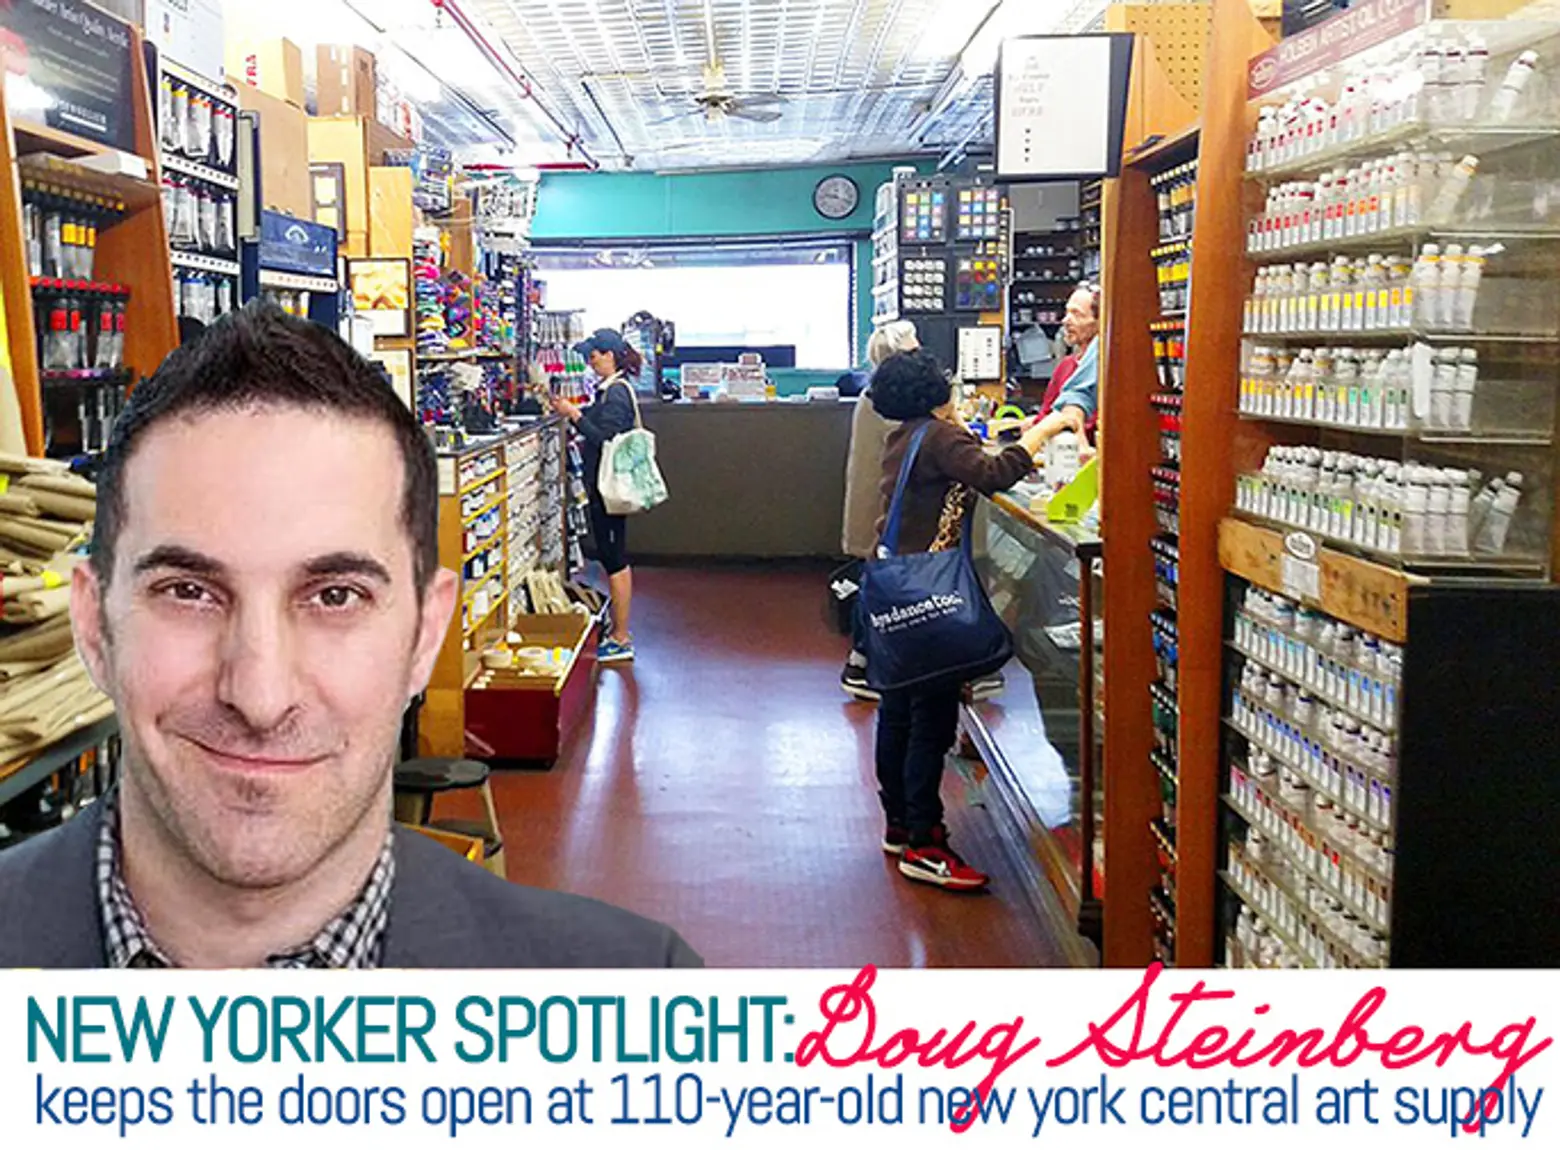 New Yorker Spotlight: Doug Steinberg Keeps the Doors Open at 110-Year-Old New York Central Art Supply